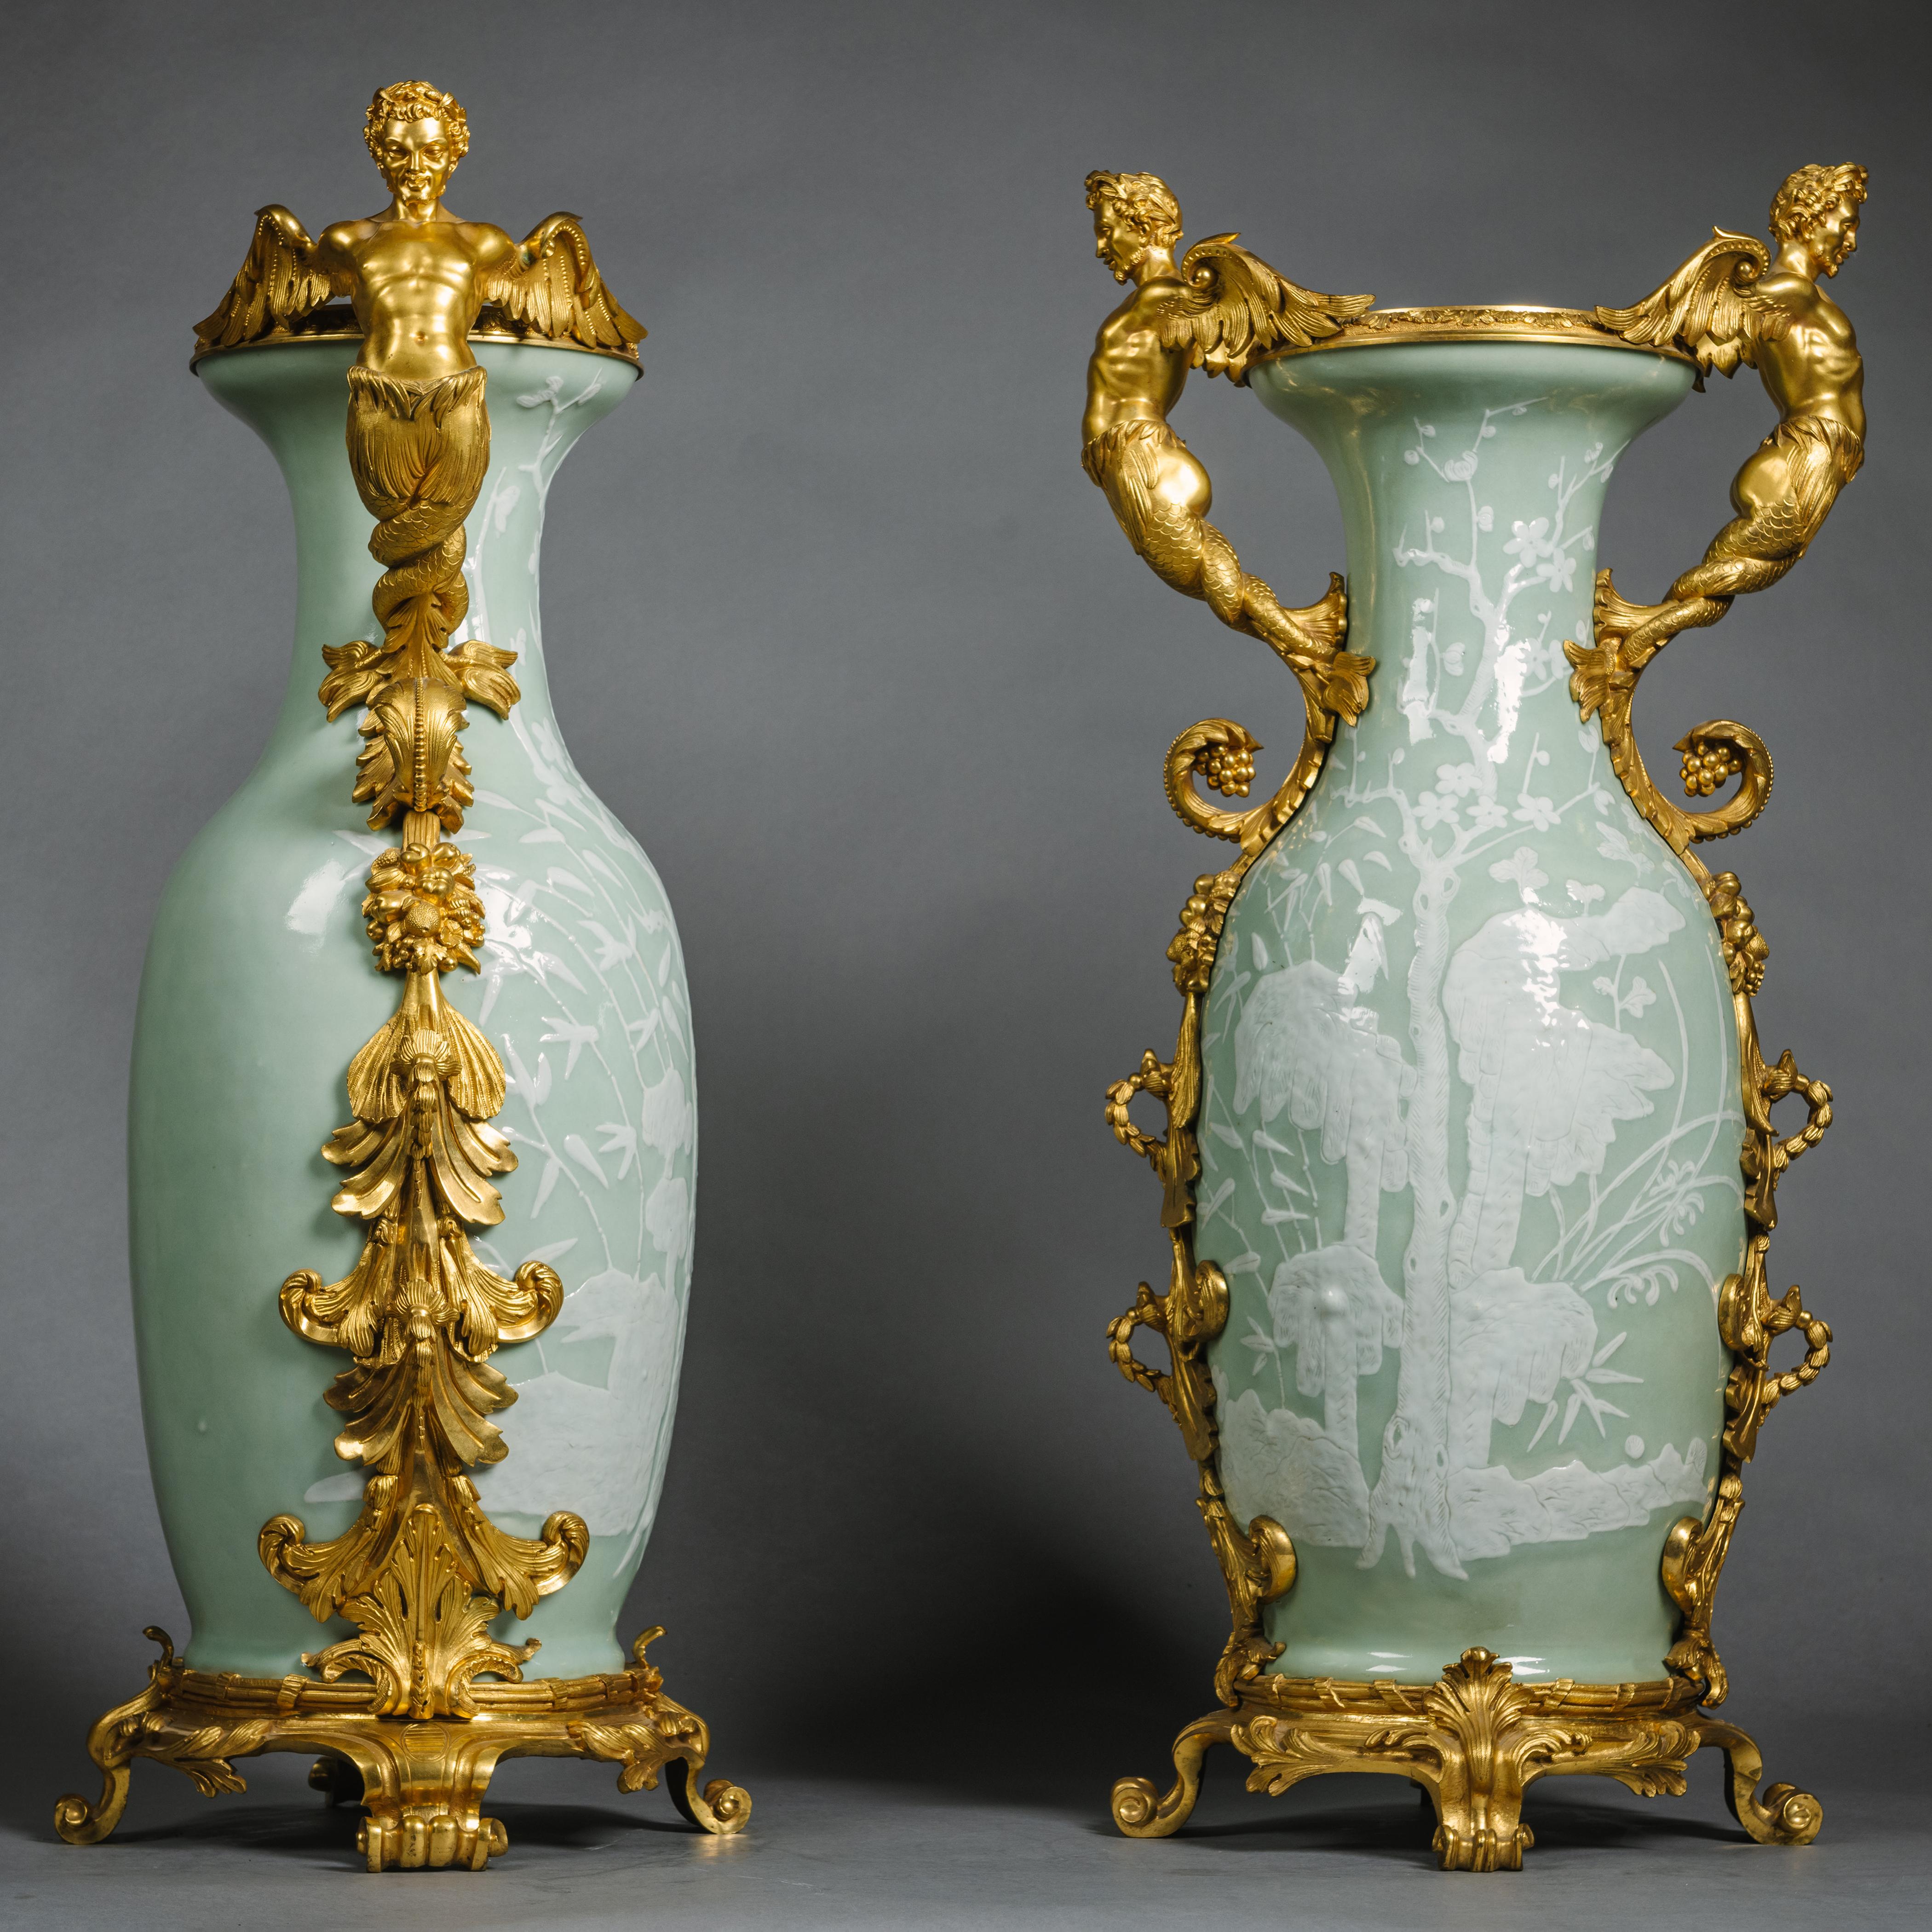 A Pair of Large Gilt-Bronze Mounted Chinese Celadon-Ground and Slip Decorated Porcelain Vases.

These vases of Chinese celadon porcelain from the late Quing Dynasty are slip-decorated with willow trees and prunus flowers. The finely sculpted